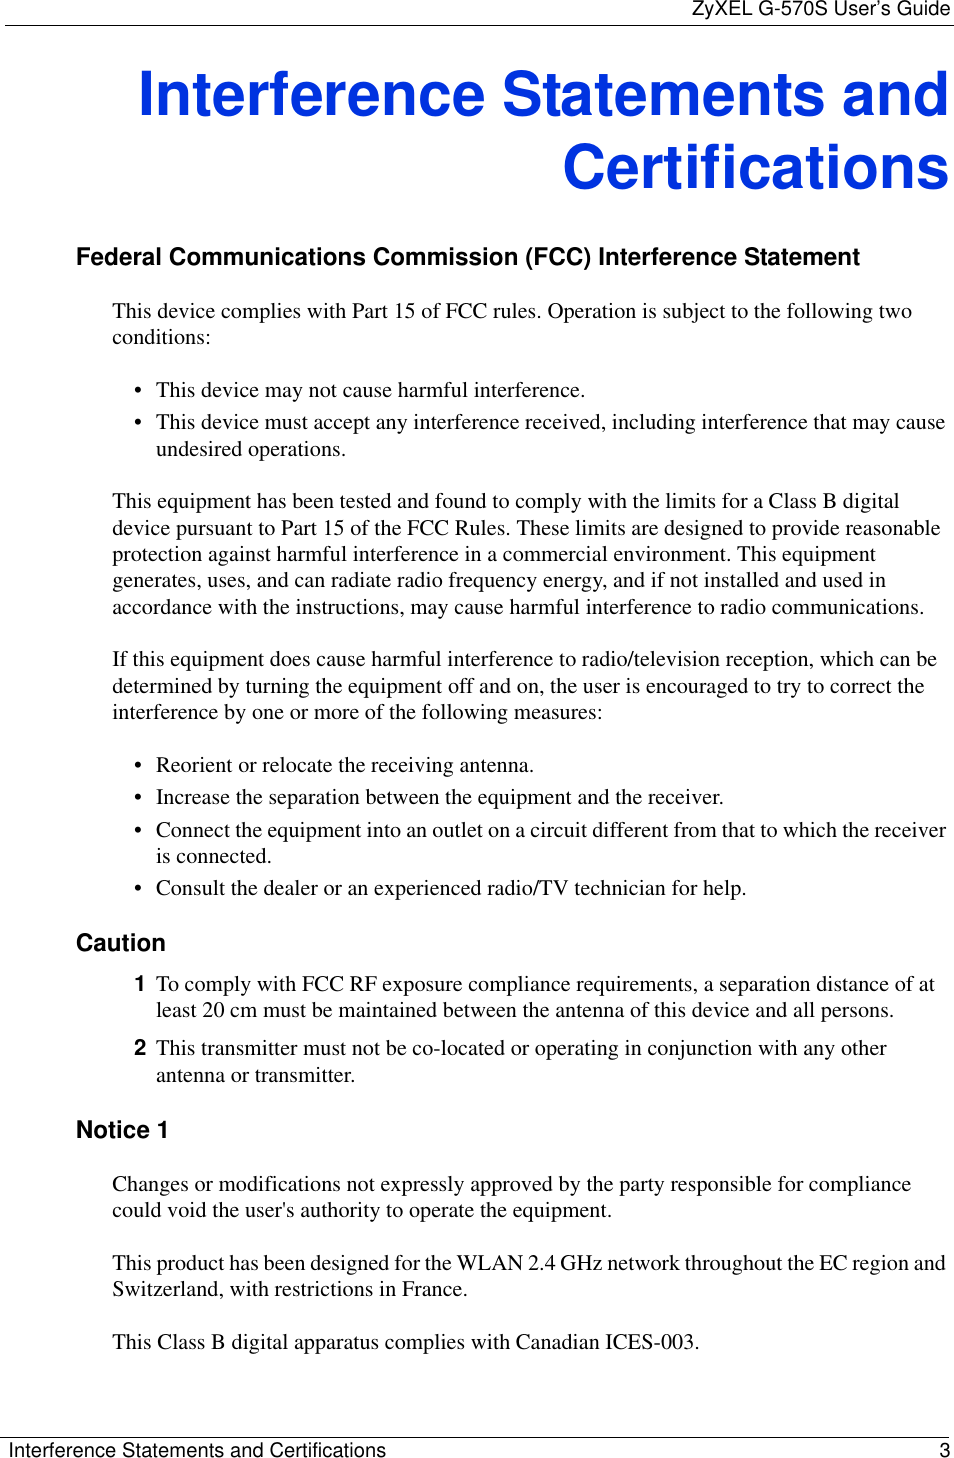 ZyXEL G-570S User’s GuideInterference Statements and Certifications 3Interference Statements andCertificationsFederal Communications Commission (FCC) Interference StatementThis device complies with Part 15 of FCC rules. Operation is subject to the following two conditions:• This device may not cause harmful interference.• This device must accept any interference received, including interference that may cause undesired operations.This equipment has been tested and found to comply with the limits for a Class B digital device pursuant to Part 15 of the FCC Rules. These limits are designed to provide reasonable protection against harmful interference in a commercial environment. This equipment generates, uses, and can radiate radio frequency energy, and if not installed and used in accordance with the instructions, may cause harmful interference to radio communications.If this equipment does cause harmful interference to radio/television reception, which can be determined by turning the equipment off and on, the user is encouraged to try to correct the interference by one or more of the following measures:• Reorient or relocate the receiving antenna.• Increase the separation between the equipment and the receiver.• Connect the equipment into an outlet on a circuit different from that to which the receiver is connected.• Consult the dealer or an experienced radio/TV technician for help.Caution1To comply with FCC RF exposure compliance requirements, a separation distance of at least 20 cm must be maintained between the antenna of this device and all persons.2This transmitter must not be co-located or operating in conjunction with any other antenna or transmitter.Notice 1Changes or modifications not expressly approved by the party responsible for compliance could void the user&apos;s authority to operate the equipment.This product has been designed for the WLAN 2.4 GHz network throughout the EC region and Switzerland, with restrictions in France.This Class B digital apparatus complies with Canadian ICES-003.